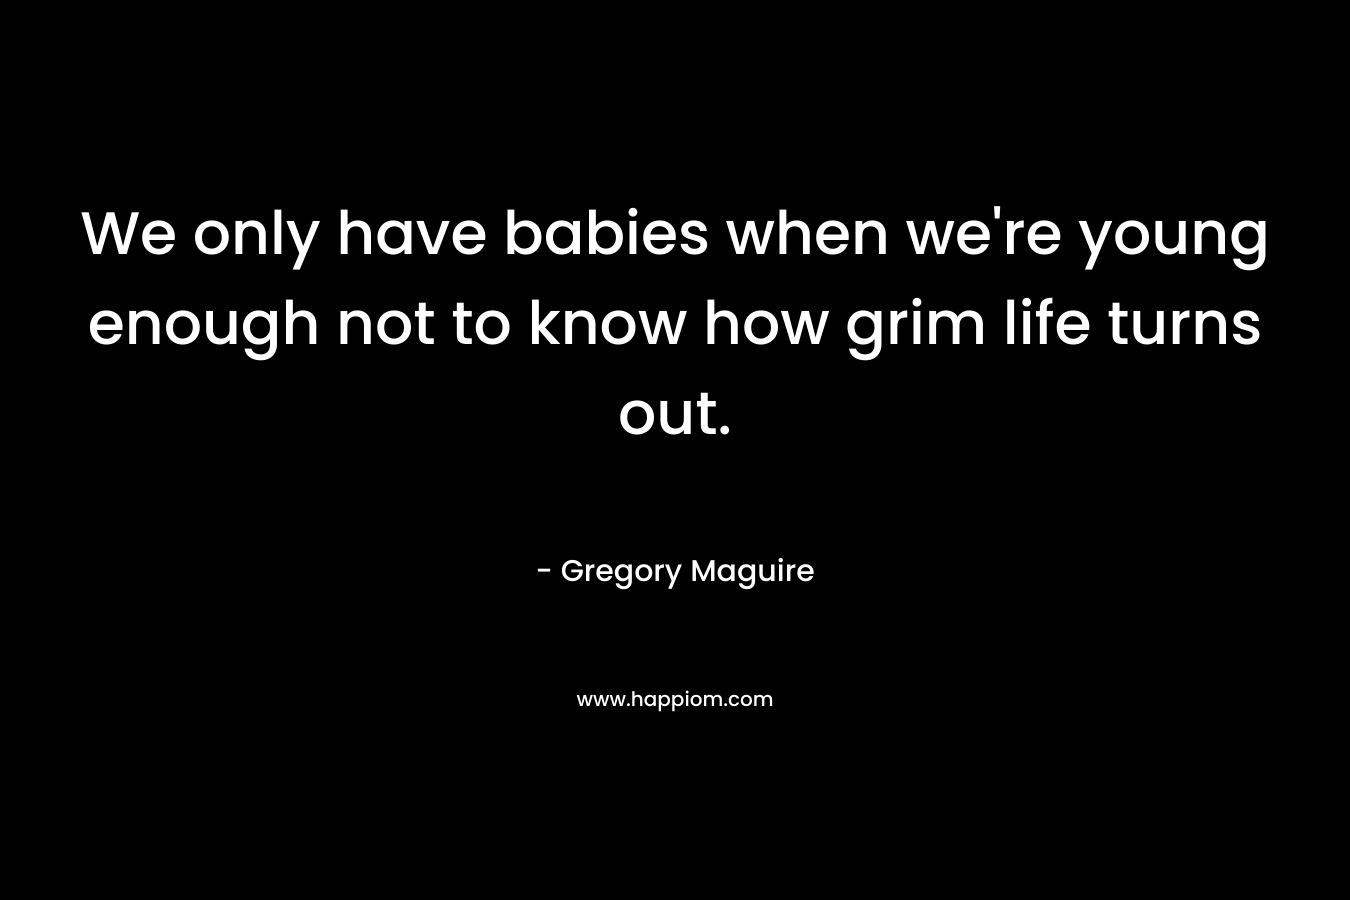 We only have babies when we’re young enough not to know how grim life turns out. – Gregory Maguire